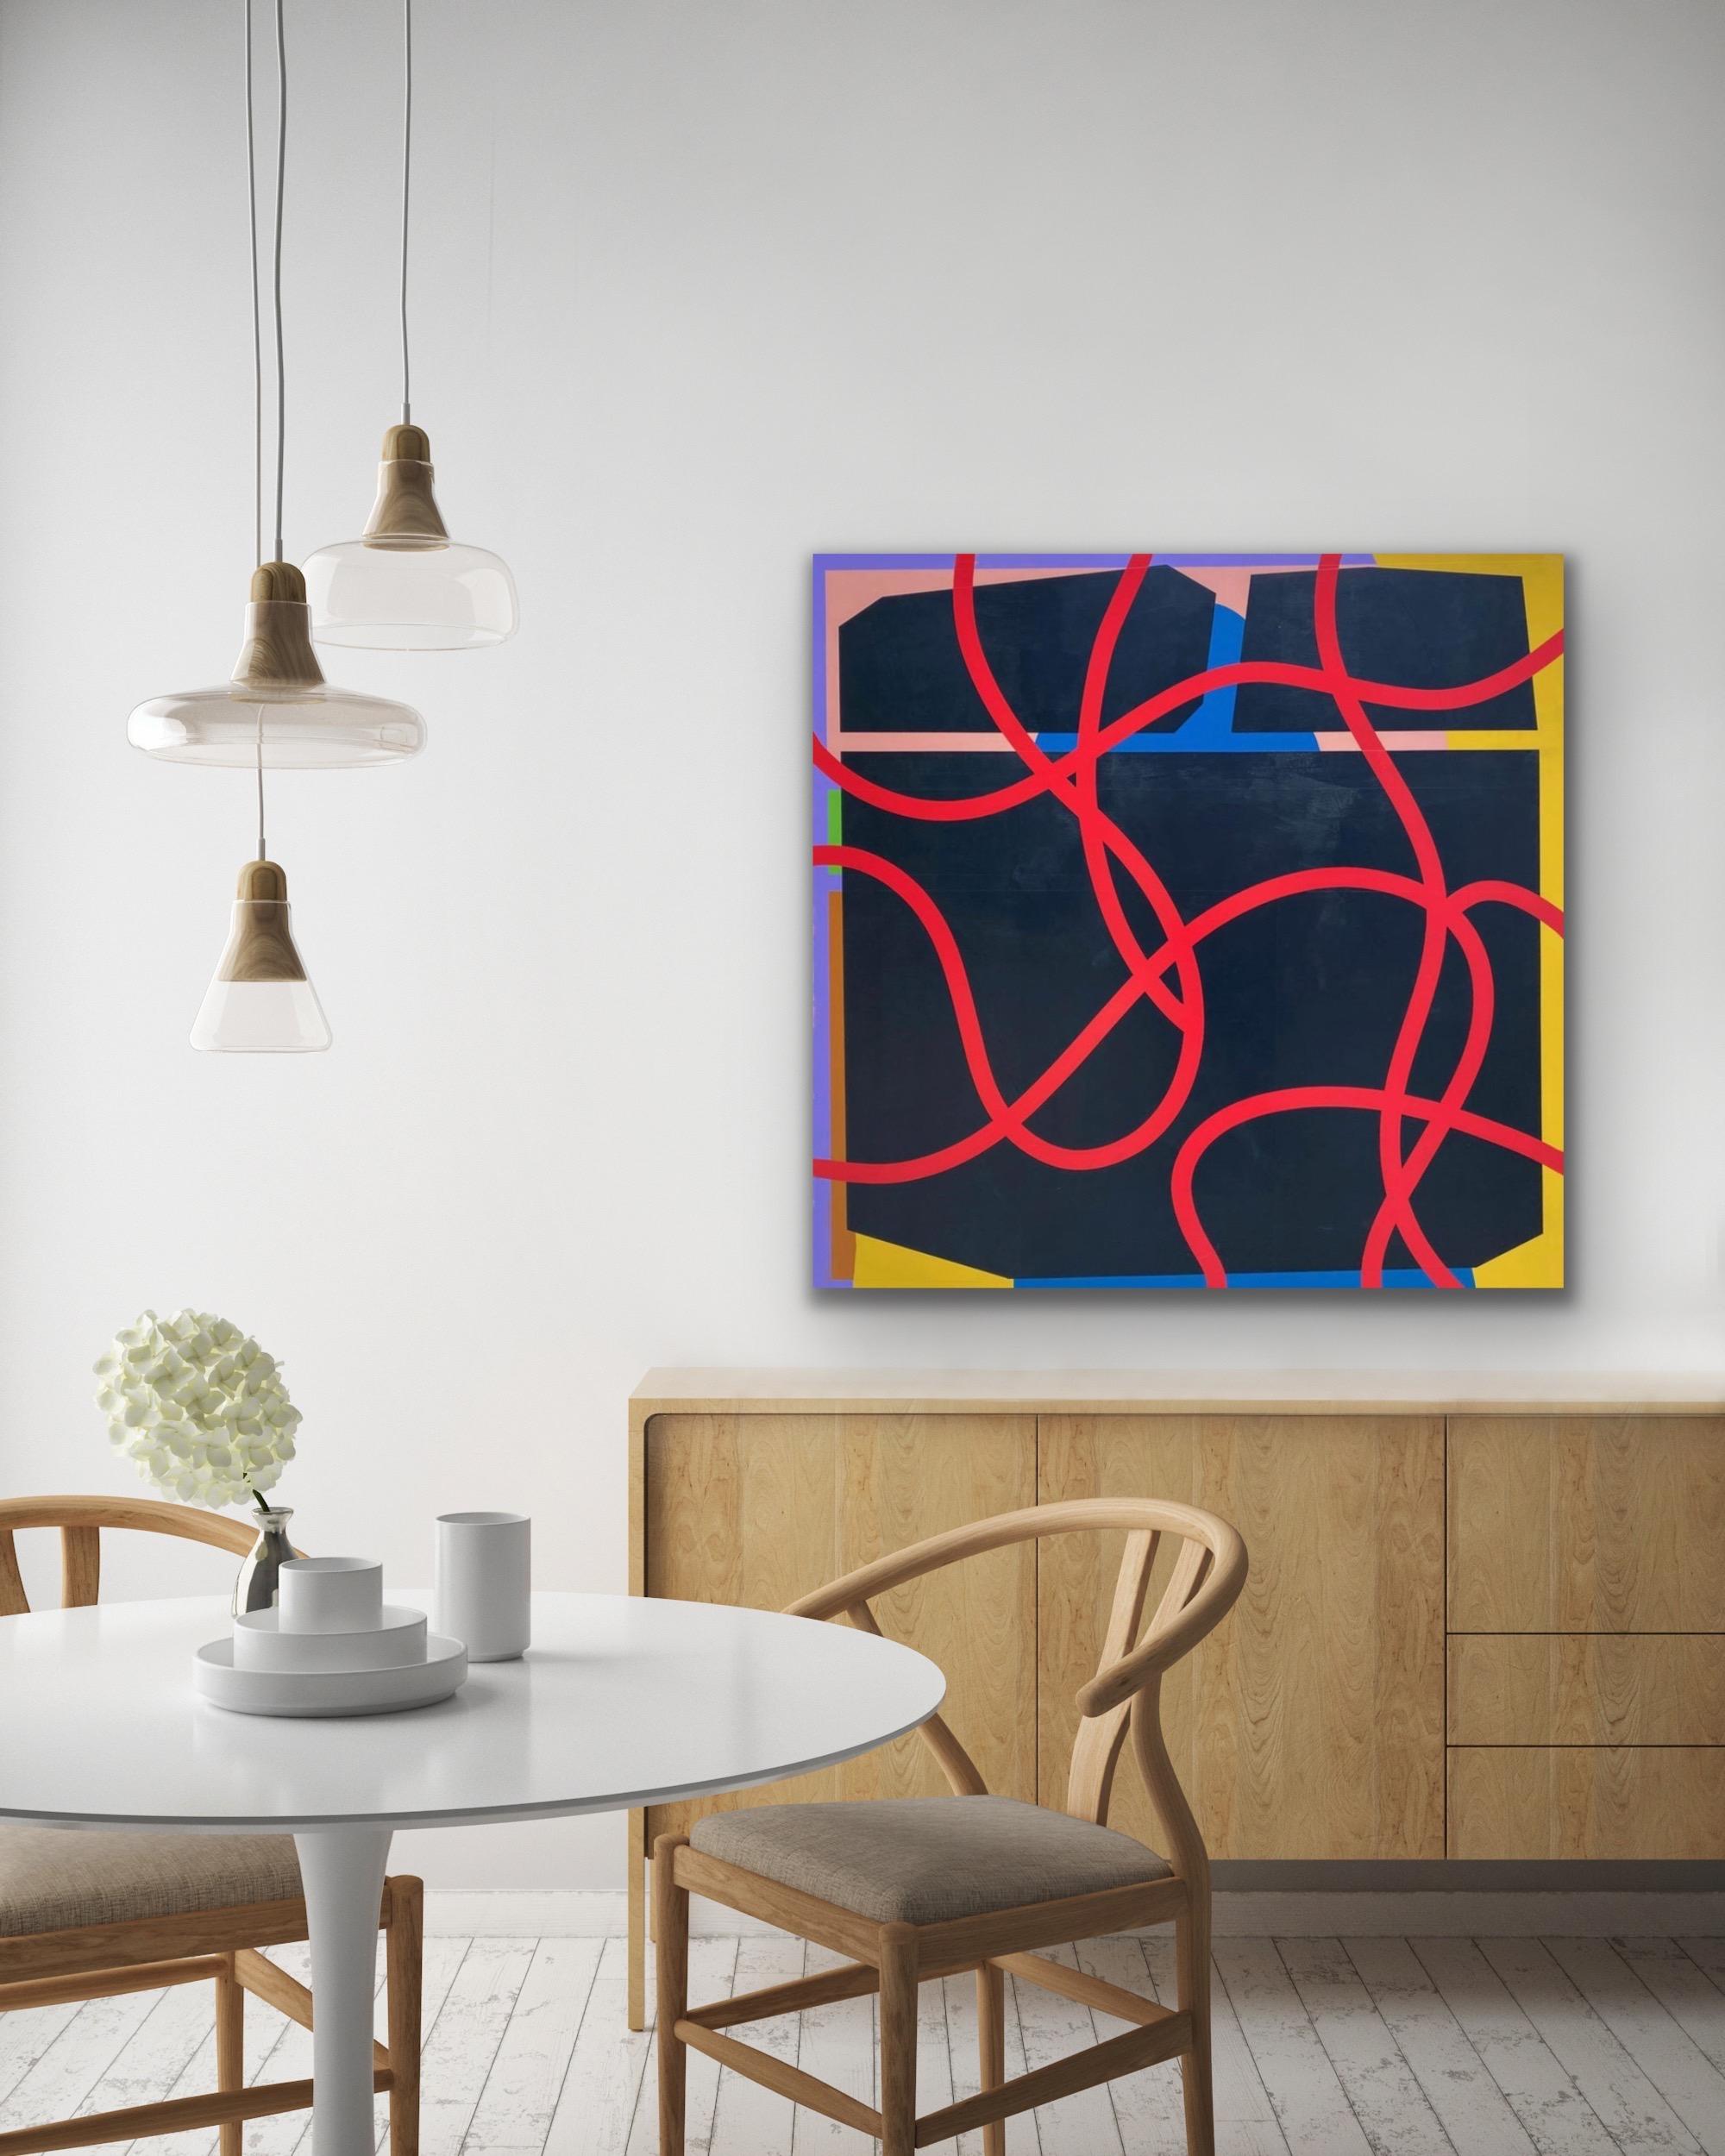 Original Abstract painting Titled “Red Ribbons” - Abstract Geometric Painting by William Finlayson